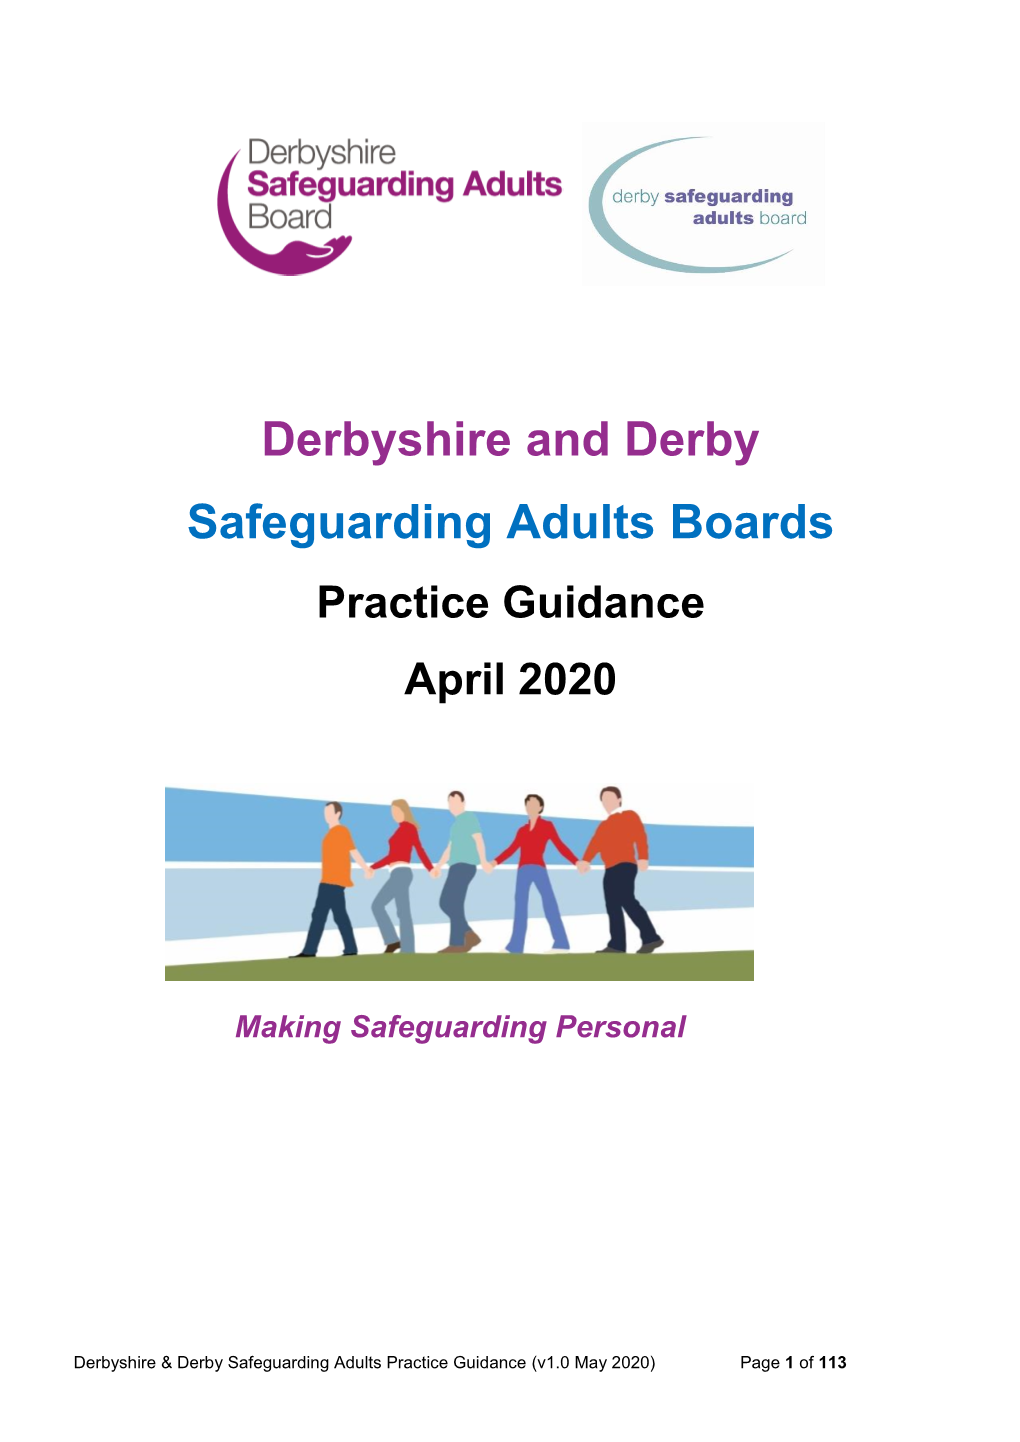 Derbyshire and Derby Safeguarding Adults Boards Practice Guidance April 2020